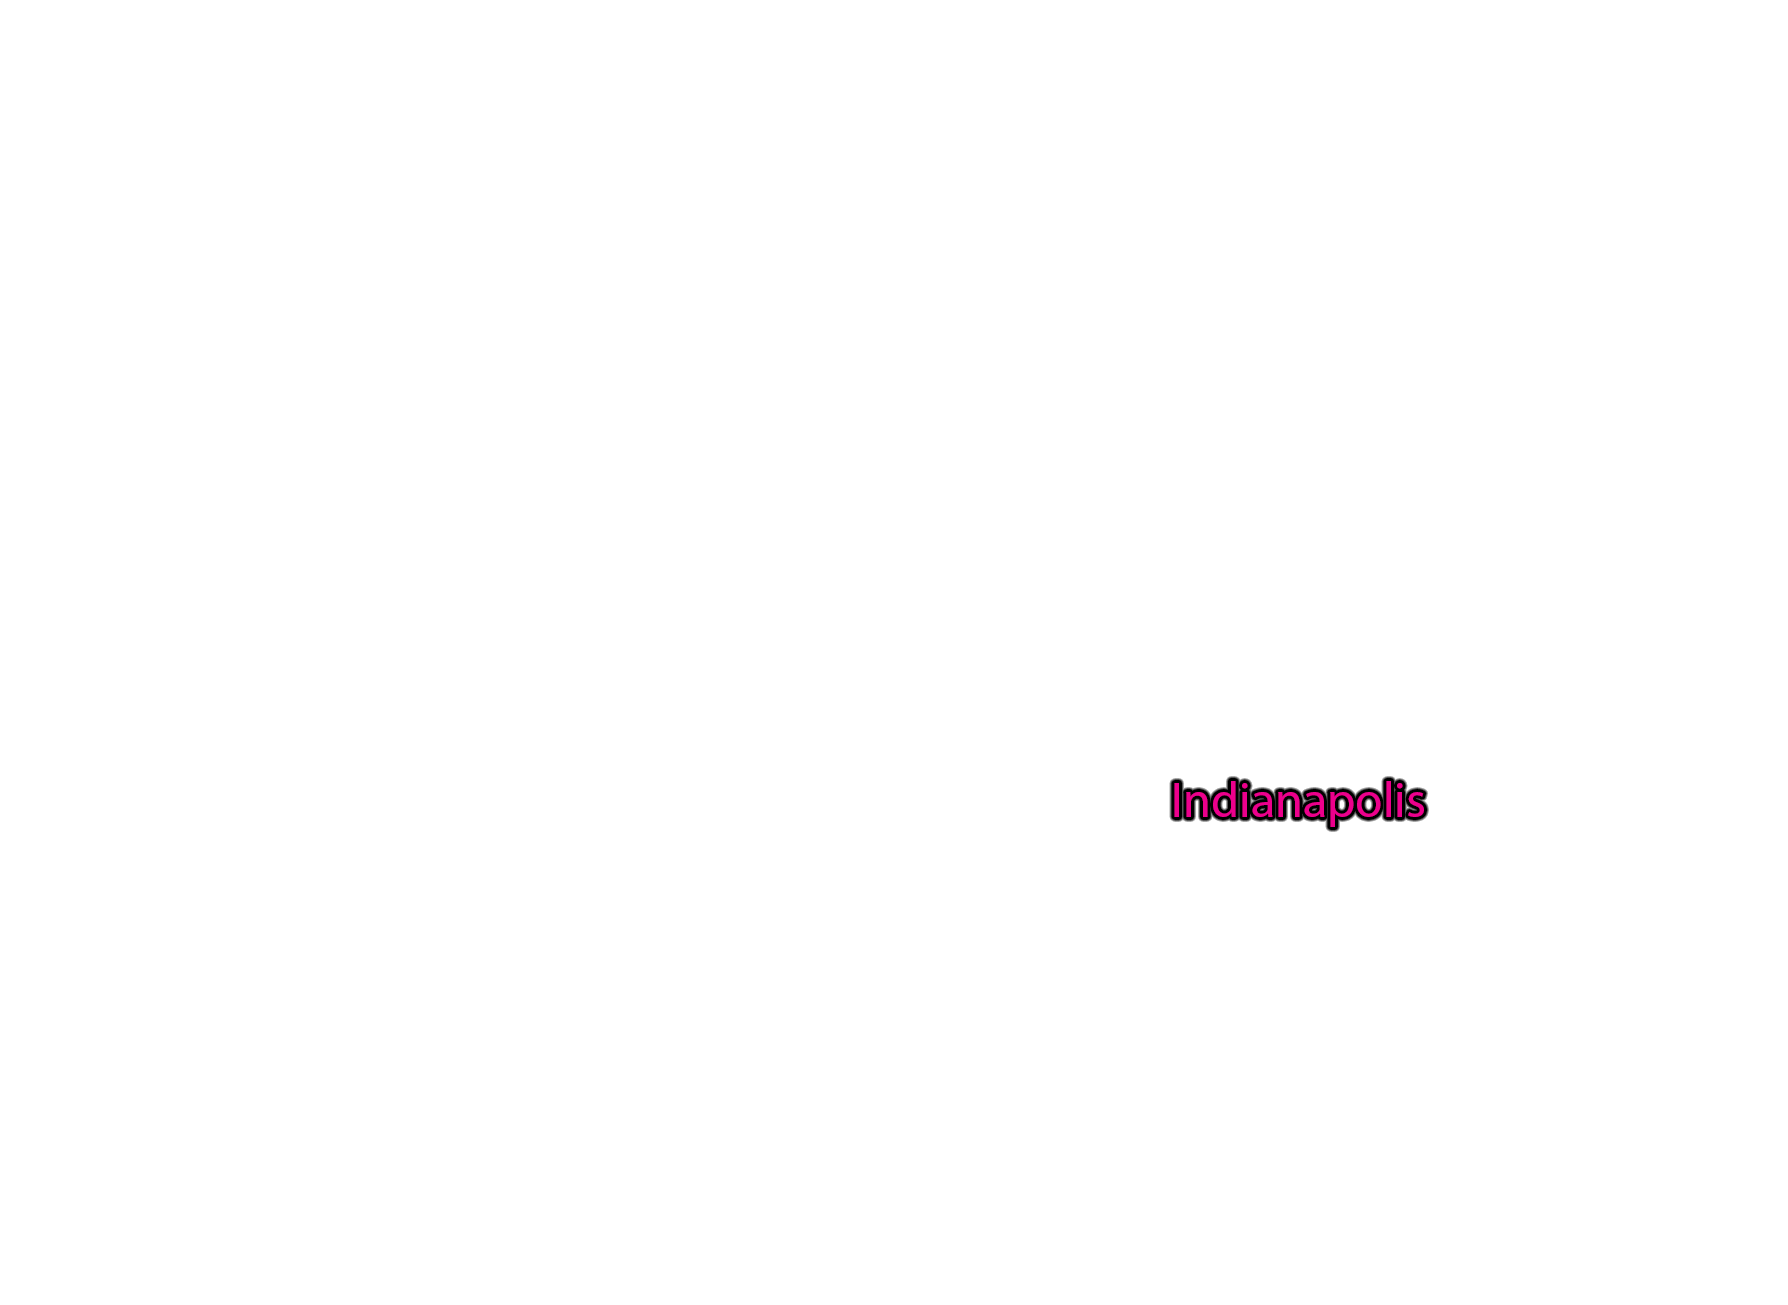 Indianapolis label with glow